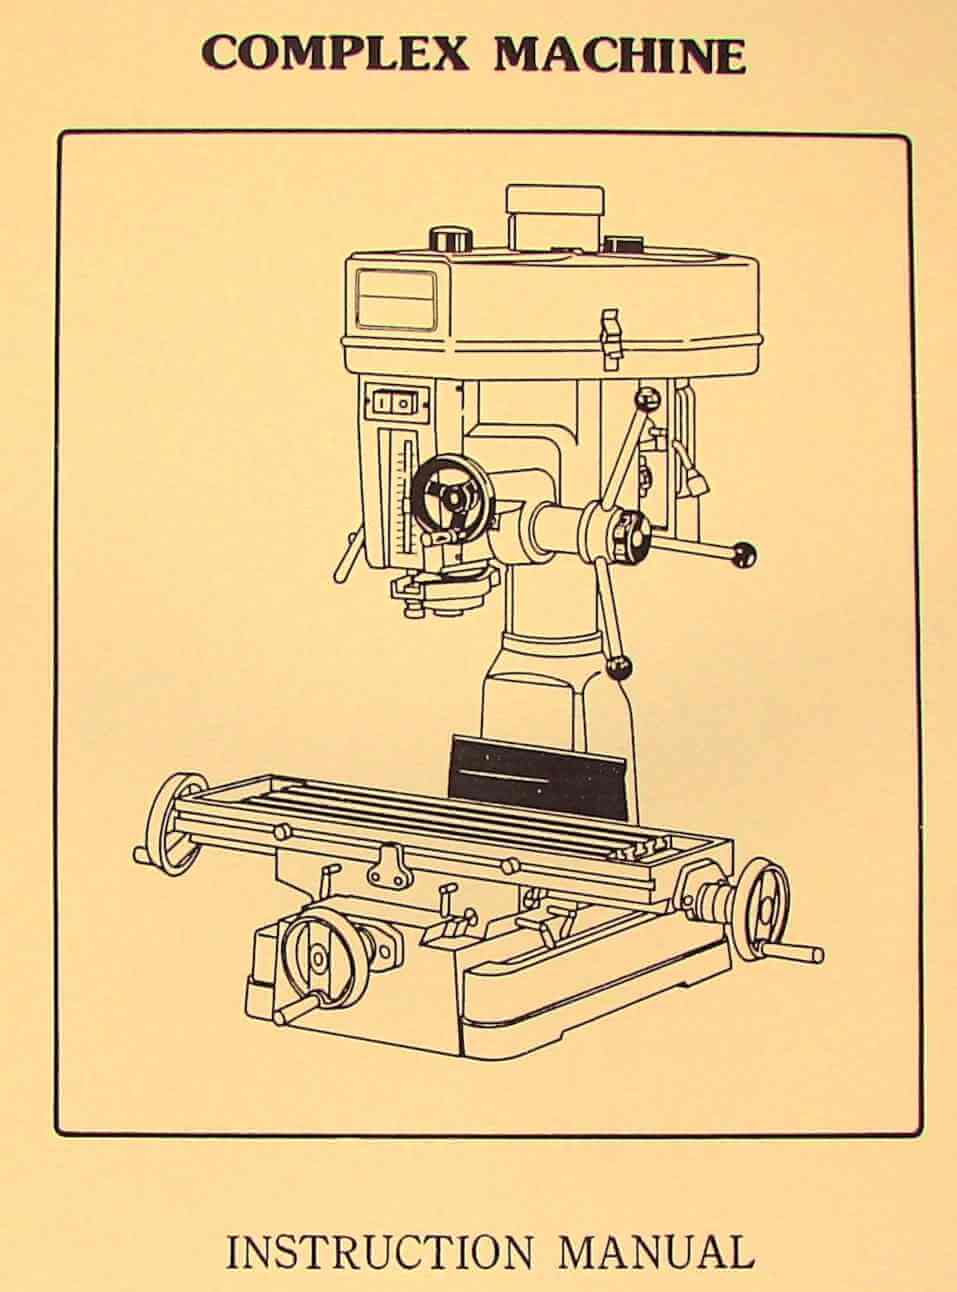 Enco 1 1/4" Complex Drilling and Milling Machine Operations and Parts Manual 